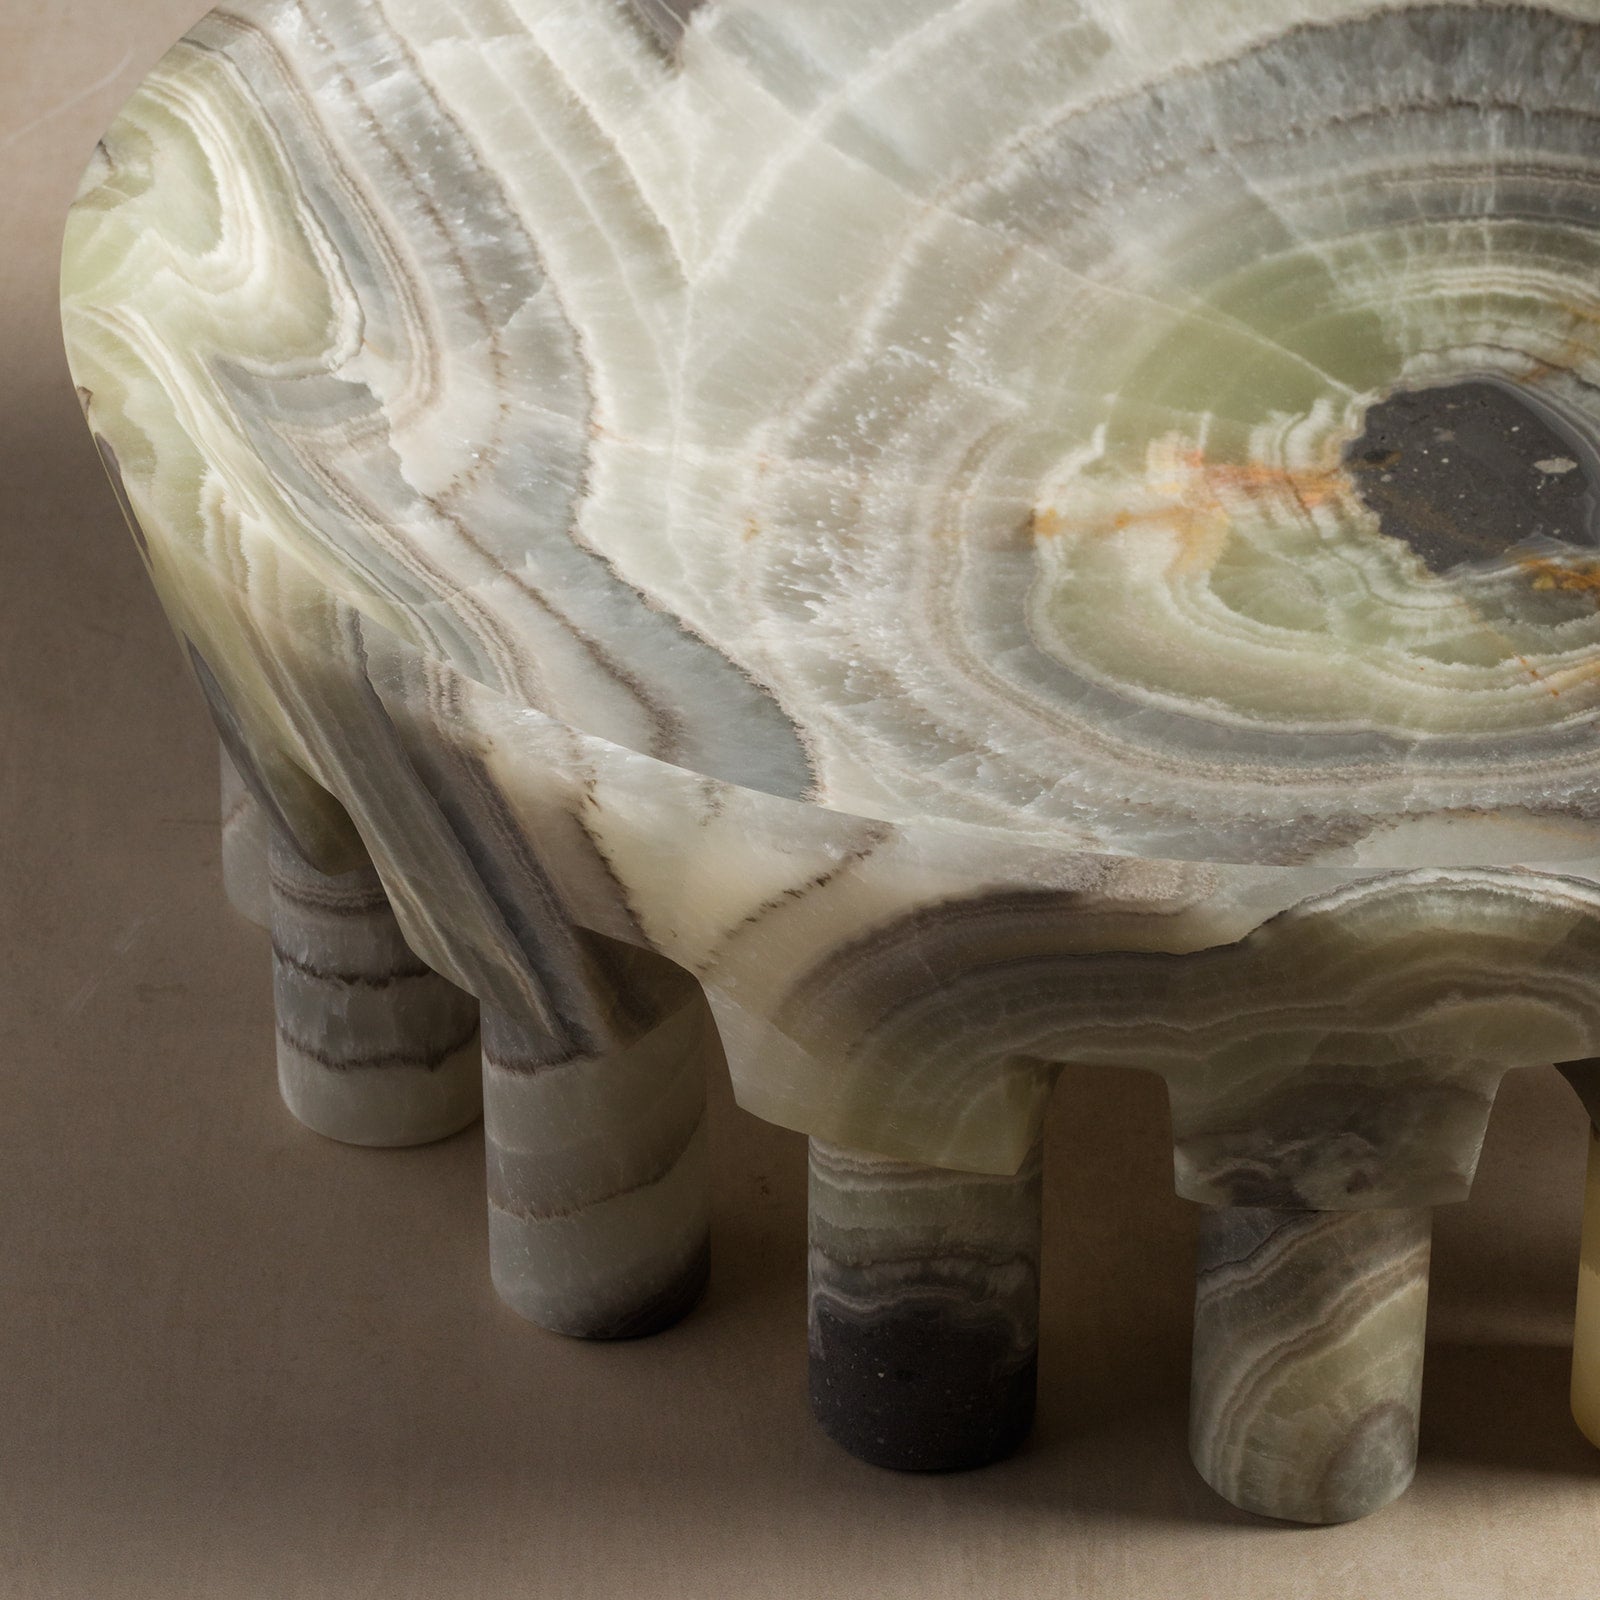 Luxury stone bowl made from green onyx